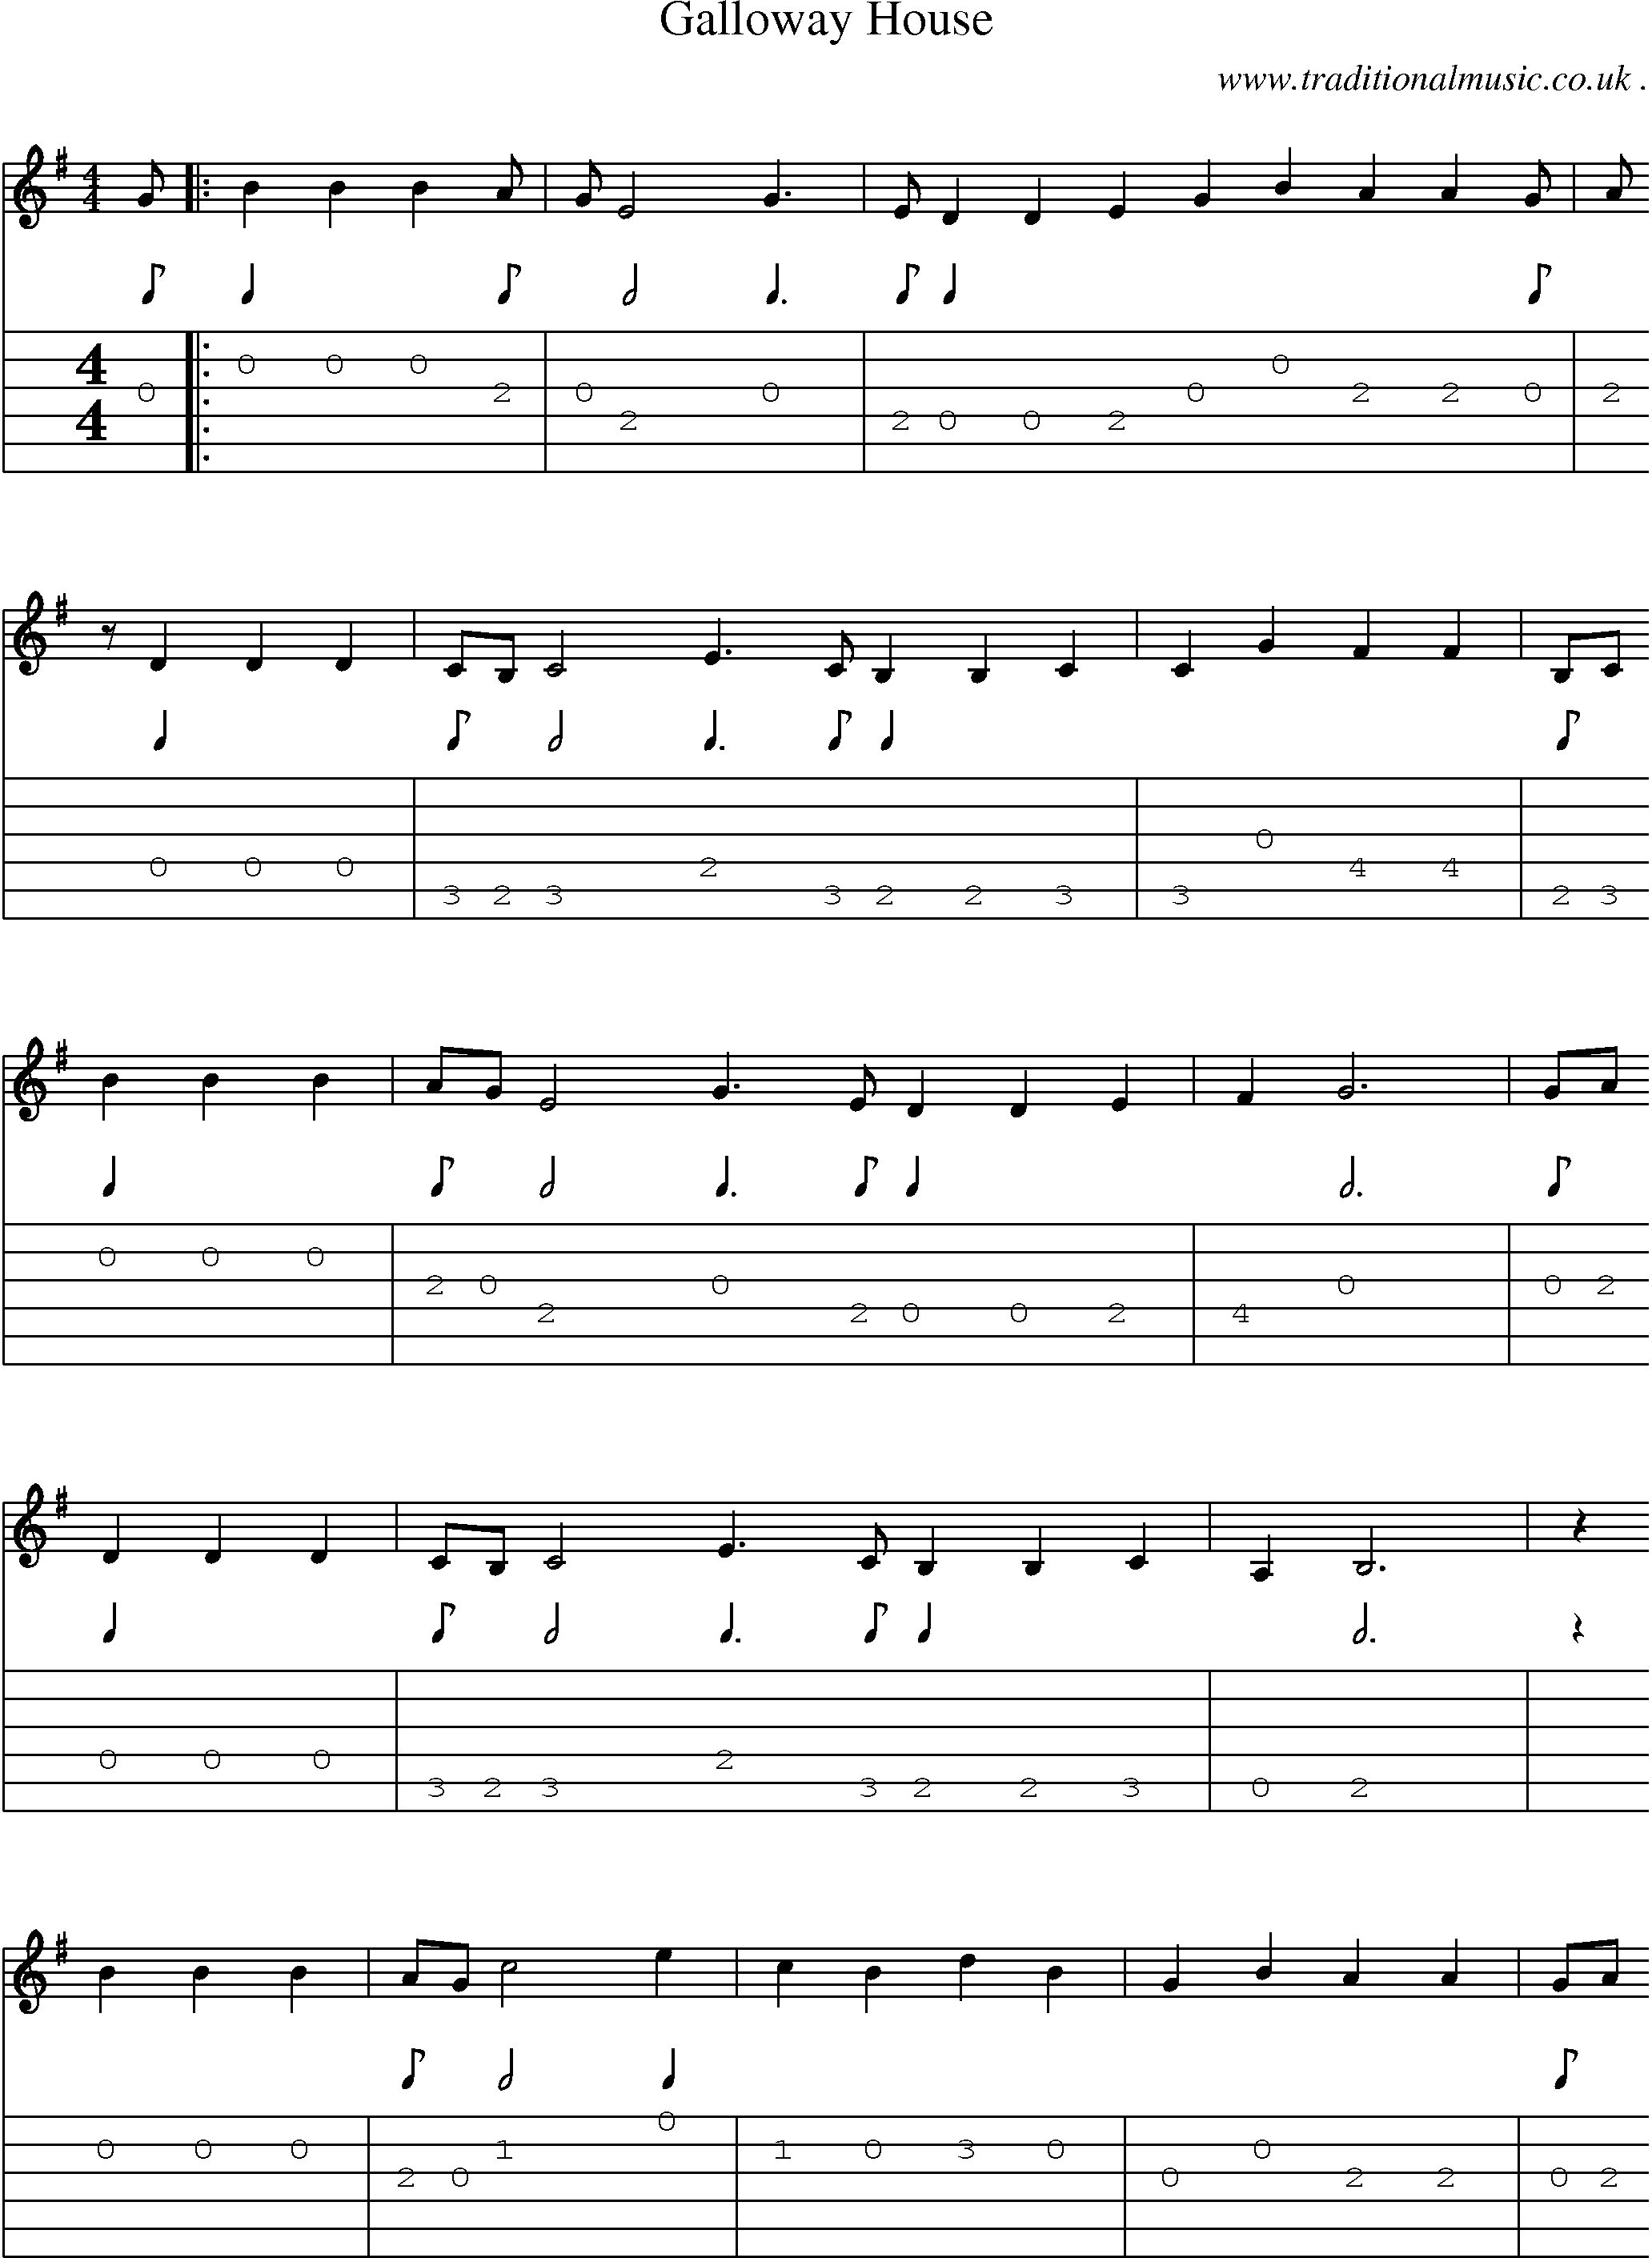 Sheet-Music and Guitar Tabs for Galloway House